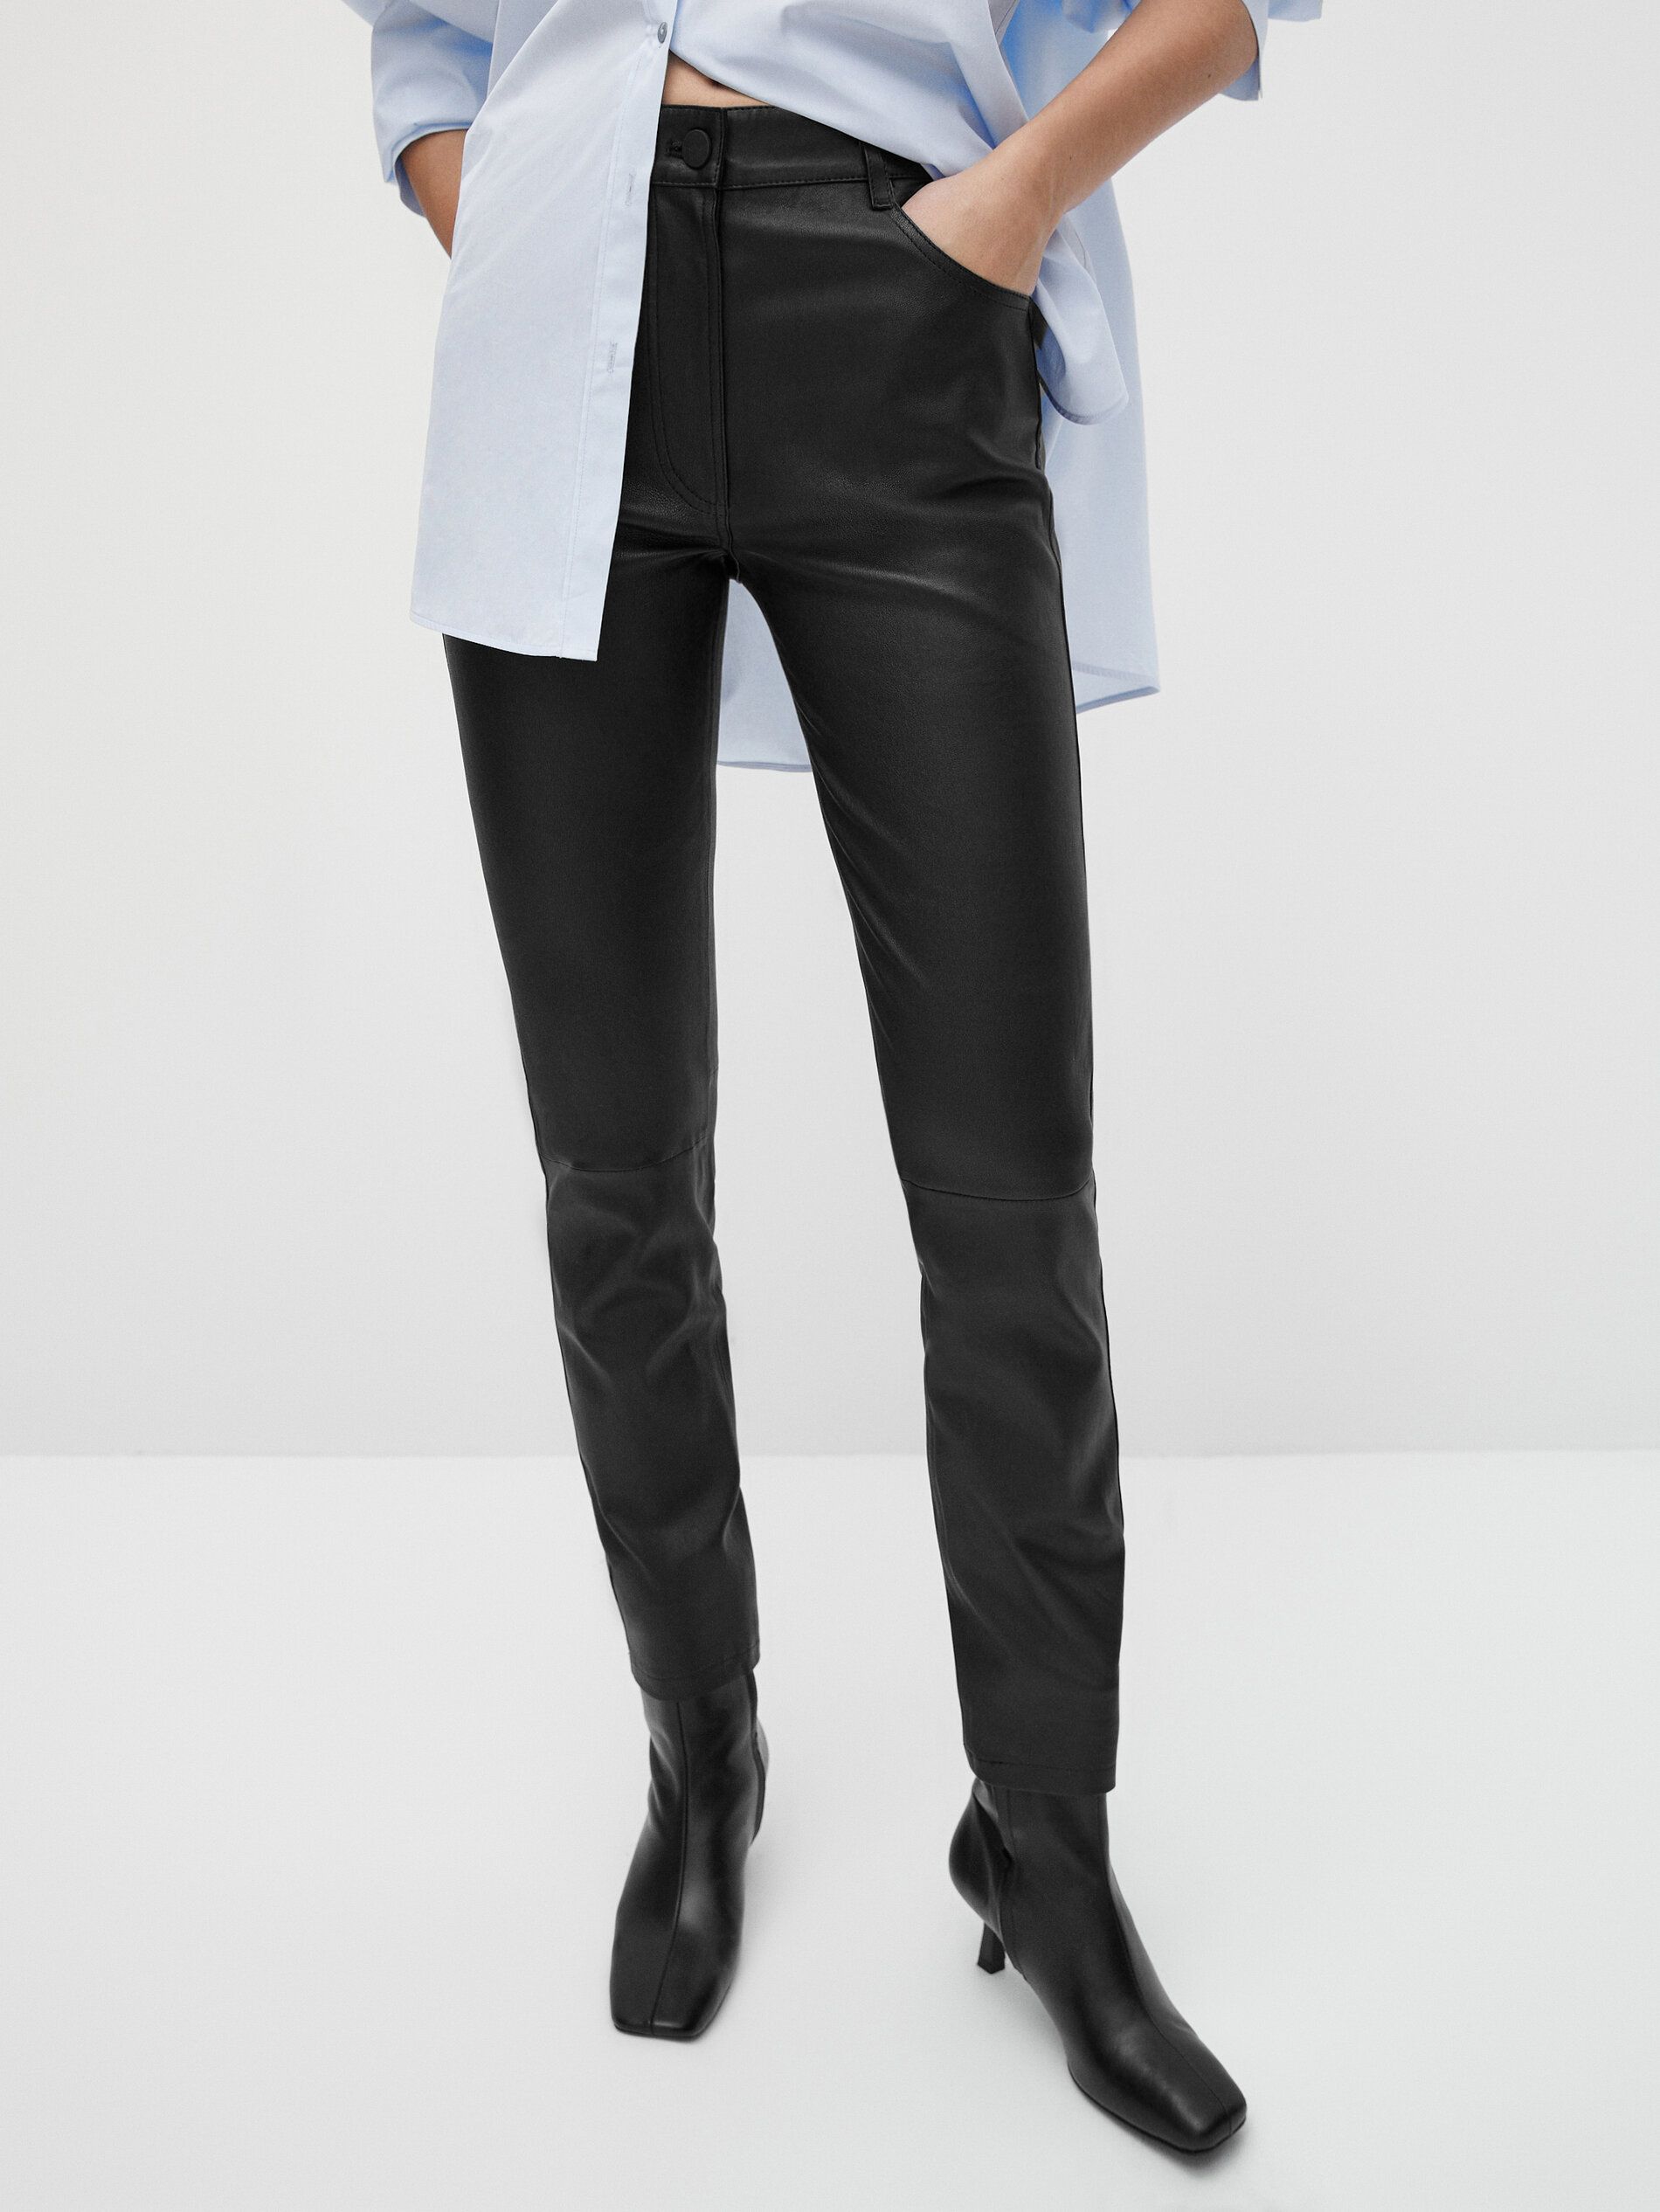 NAPPA LEATHER STRETCH TROUSERS